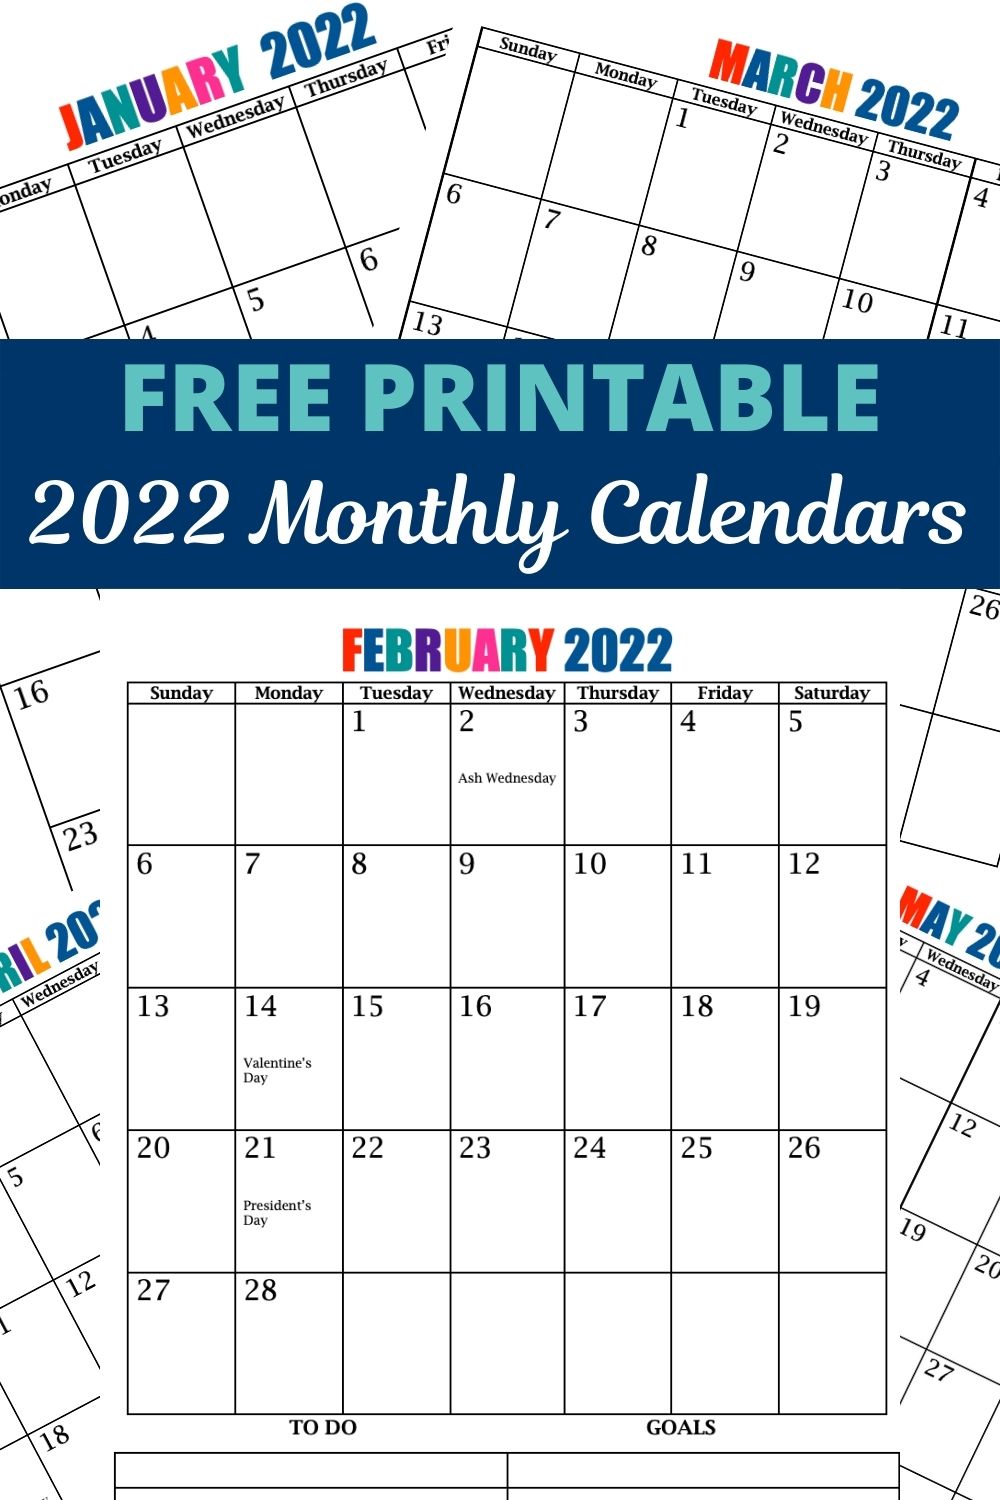 FREE 2022 printable monthly calendars